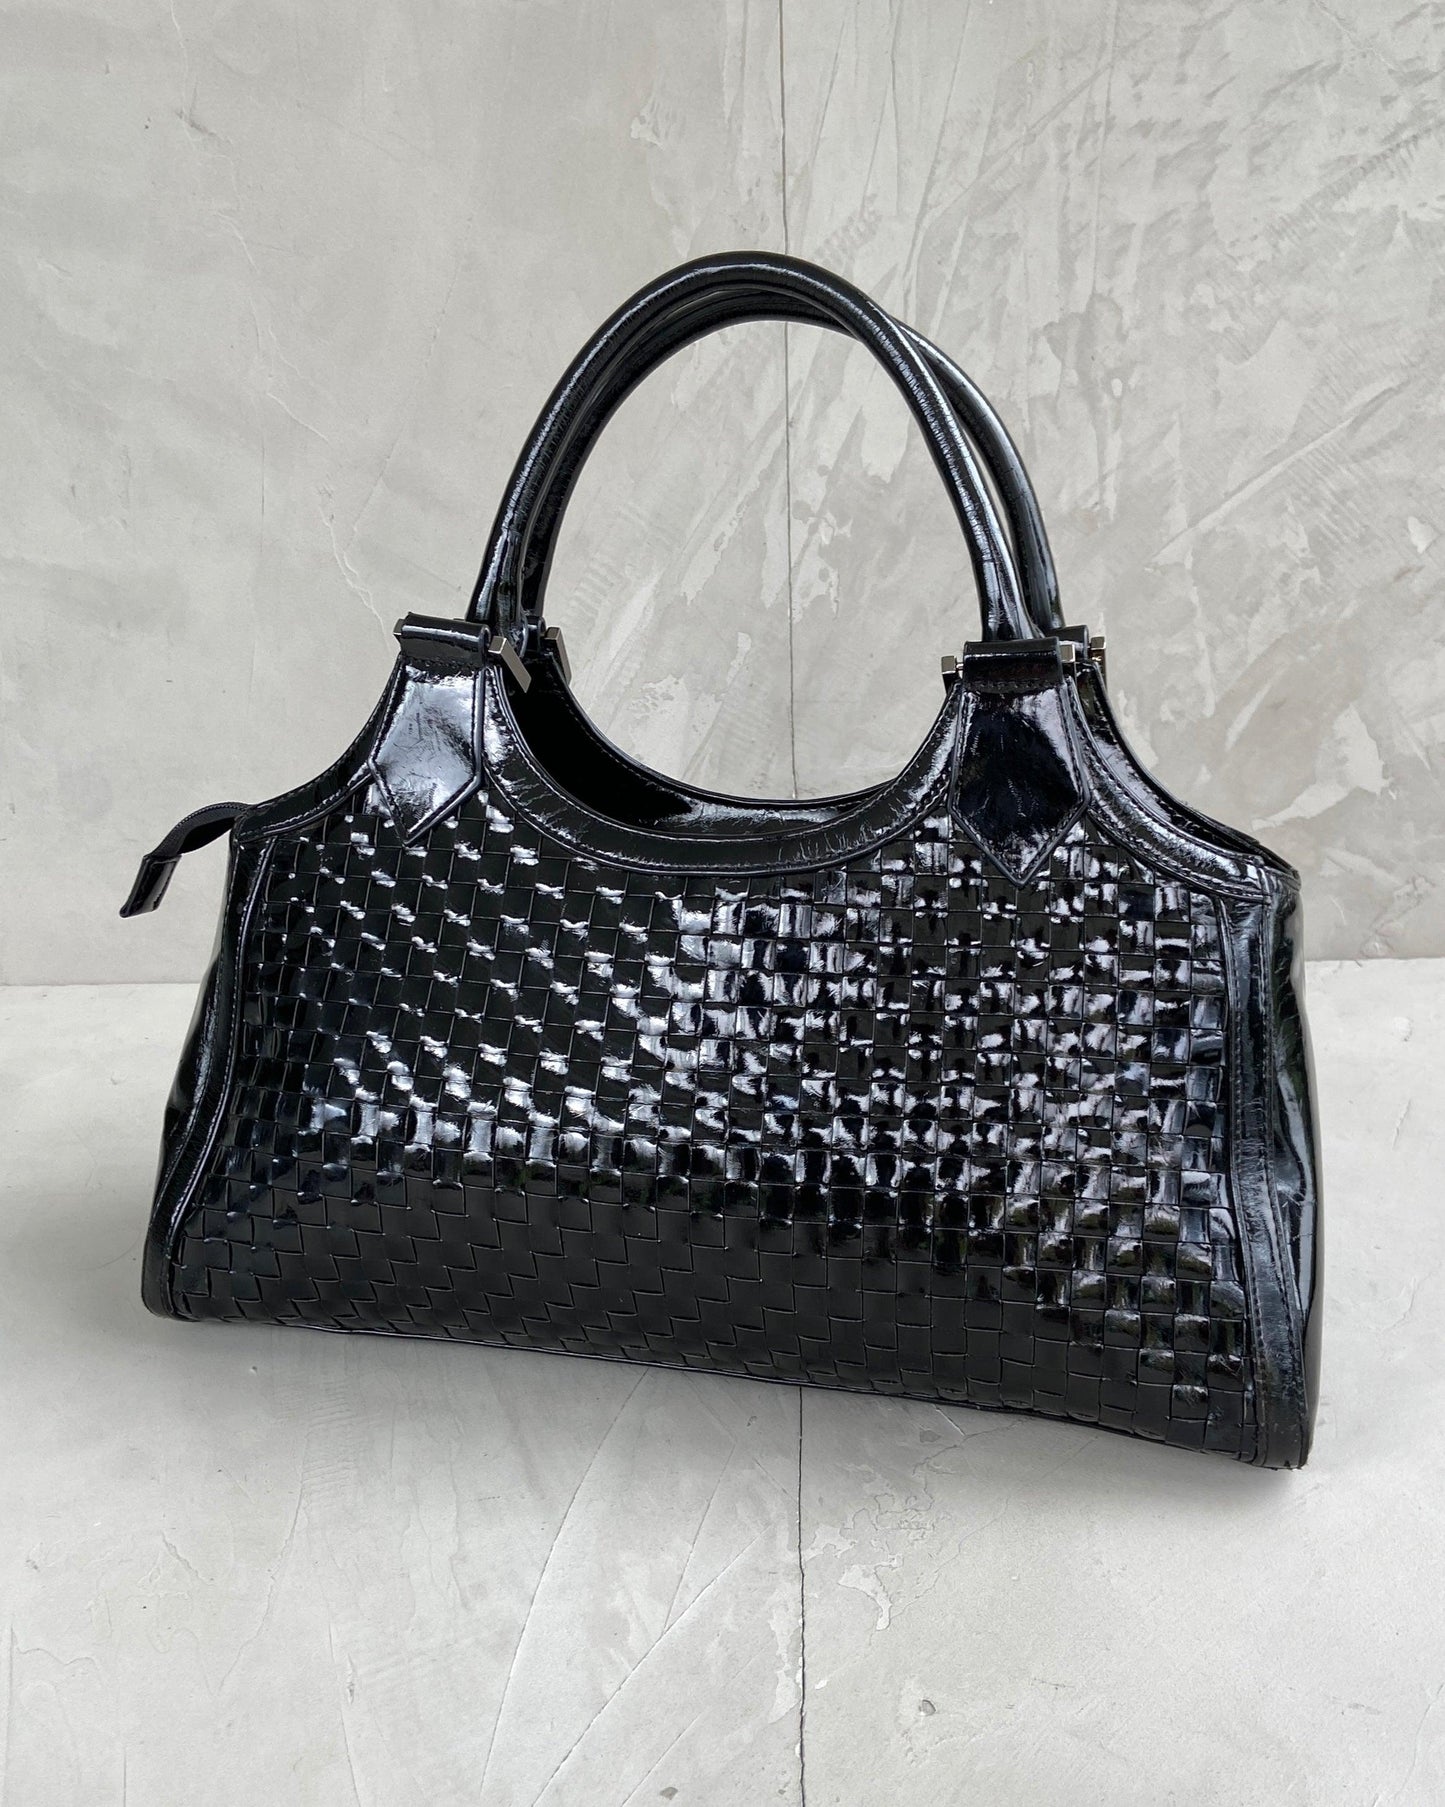 THIERRY MUGLER WOVEN LEATHER STAR HANDBAG - Known Source